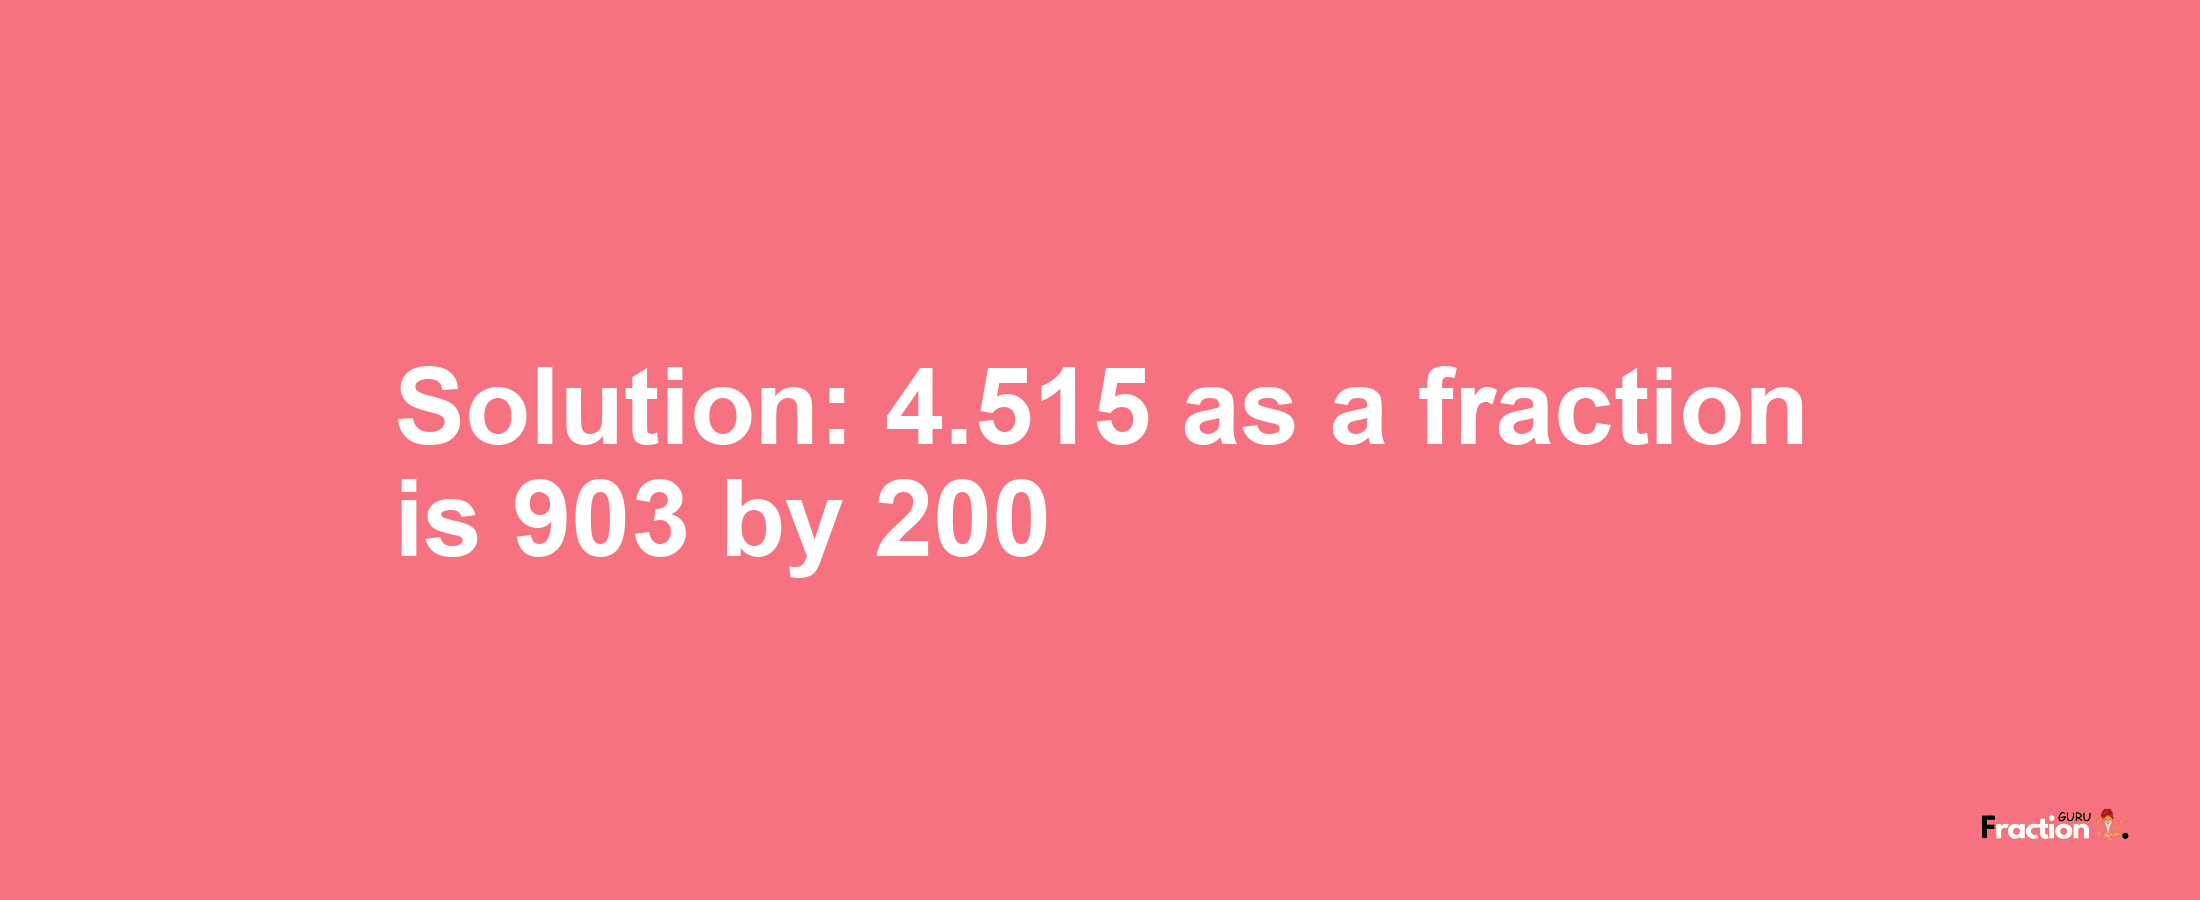 Solution:4.515 as a fraction is 903/200